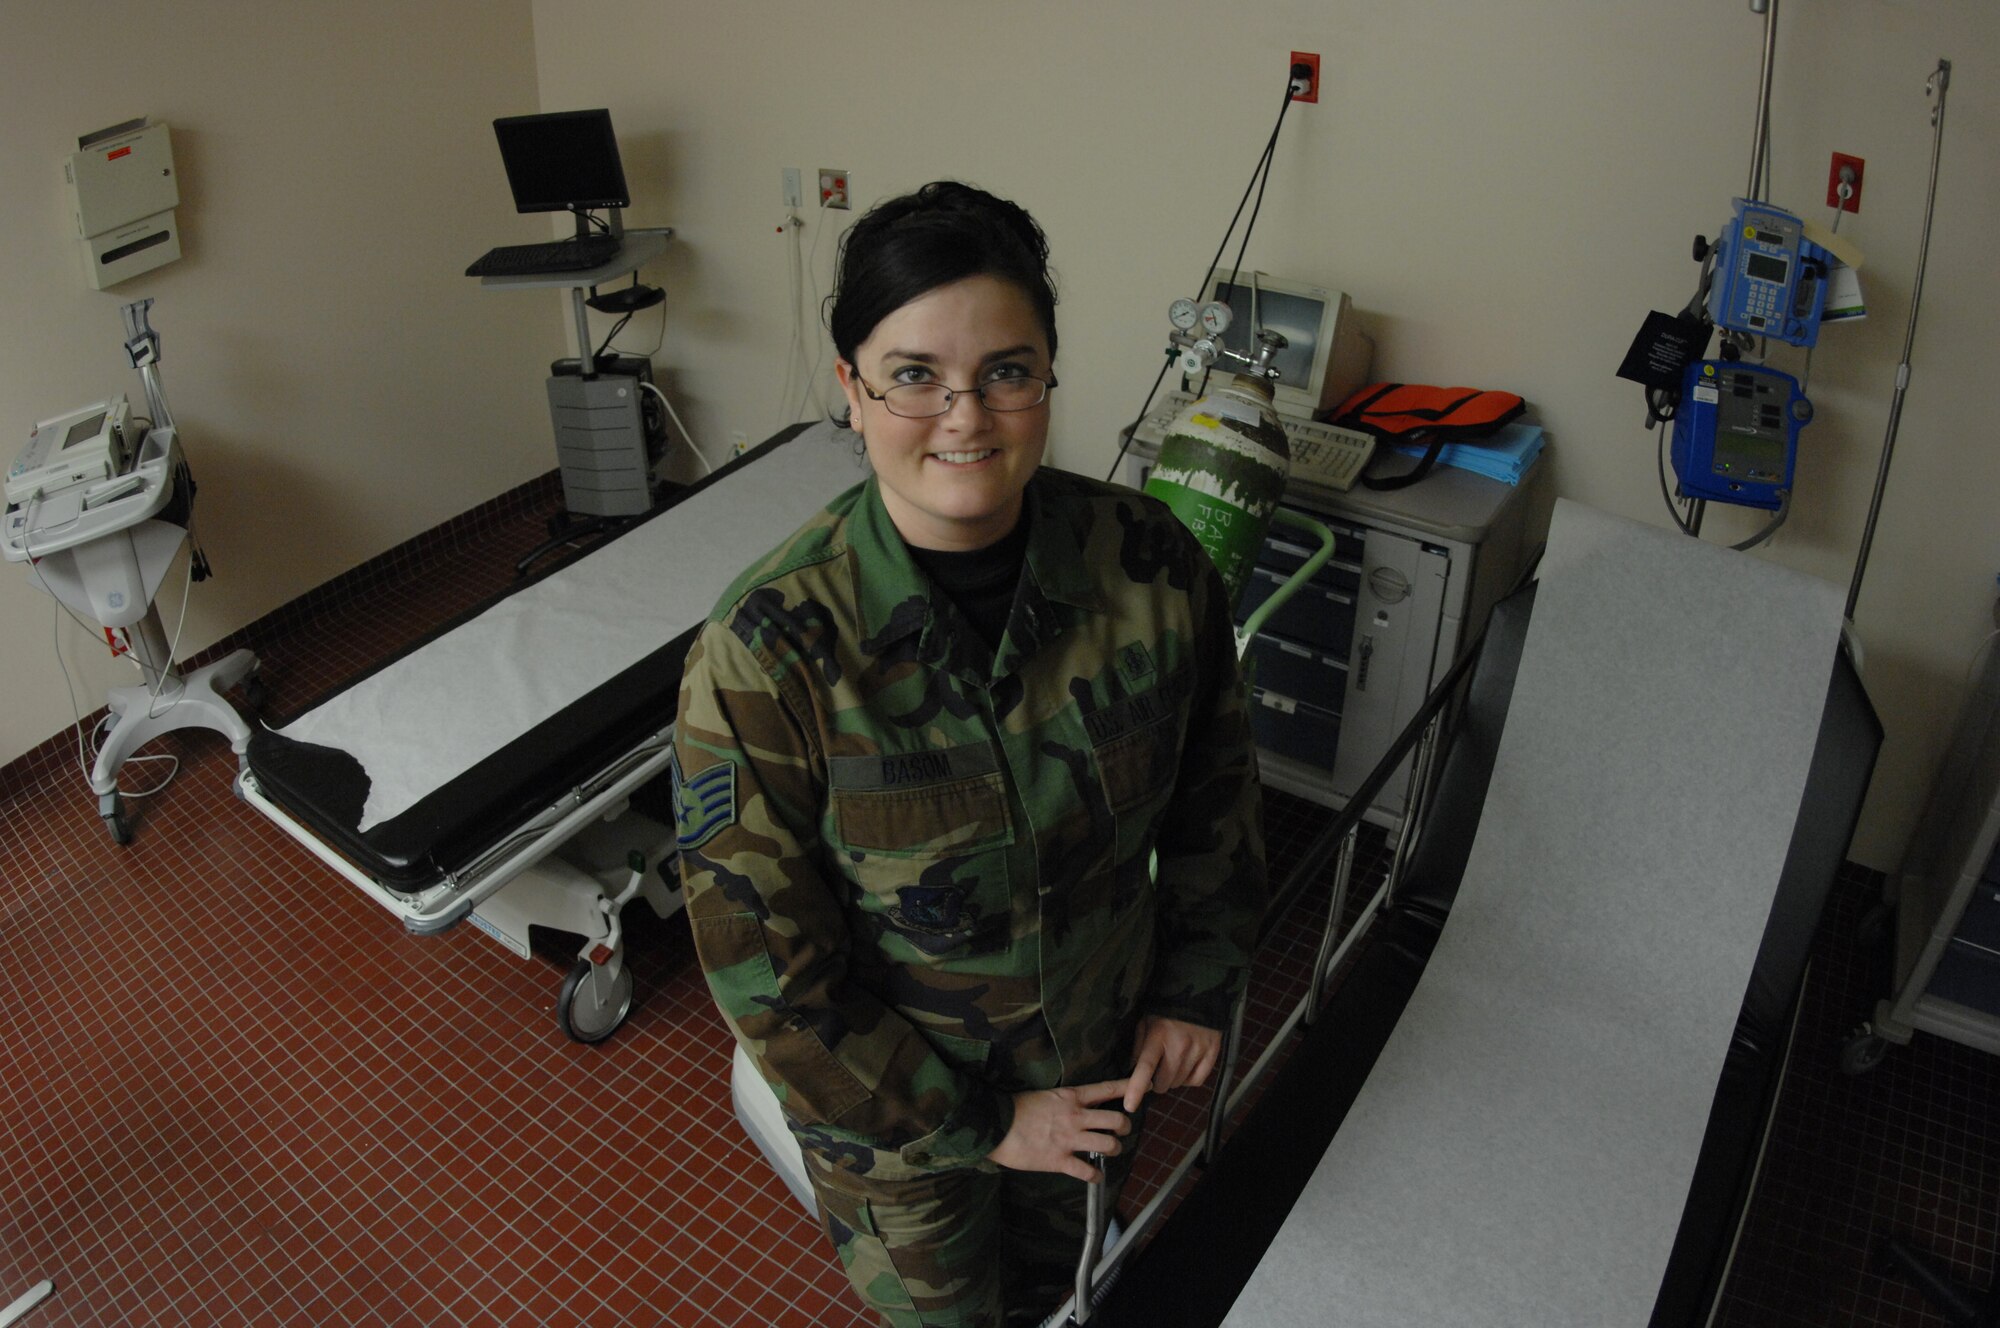 EIELSON AIR FORCE BASE, Alaska--Staff Sgt. Kelsi Basom, 354th Medical Operations Squadron emergency medical services technician, is the Hall of Fame nomination for the week of Feb. 8 to 14. (U.S. Air Force photo by Airman 1st Class Christopher Griffin)